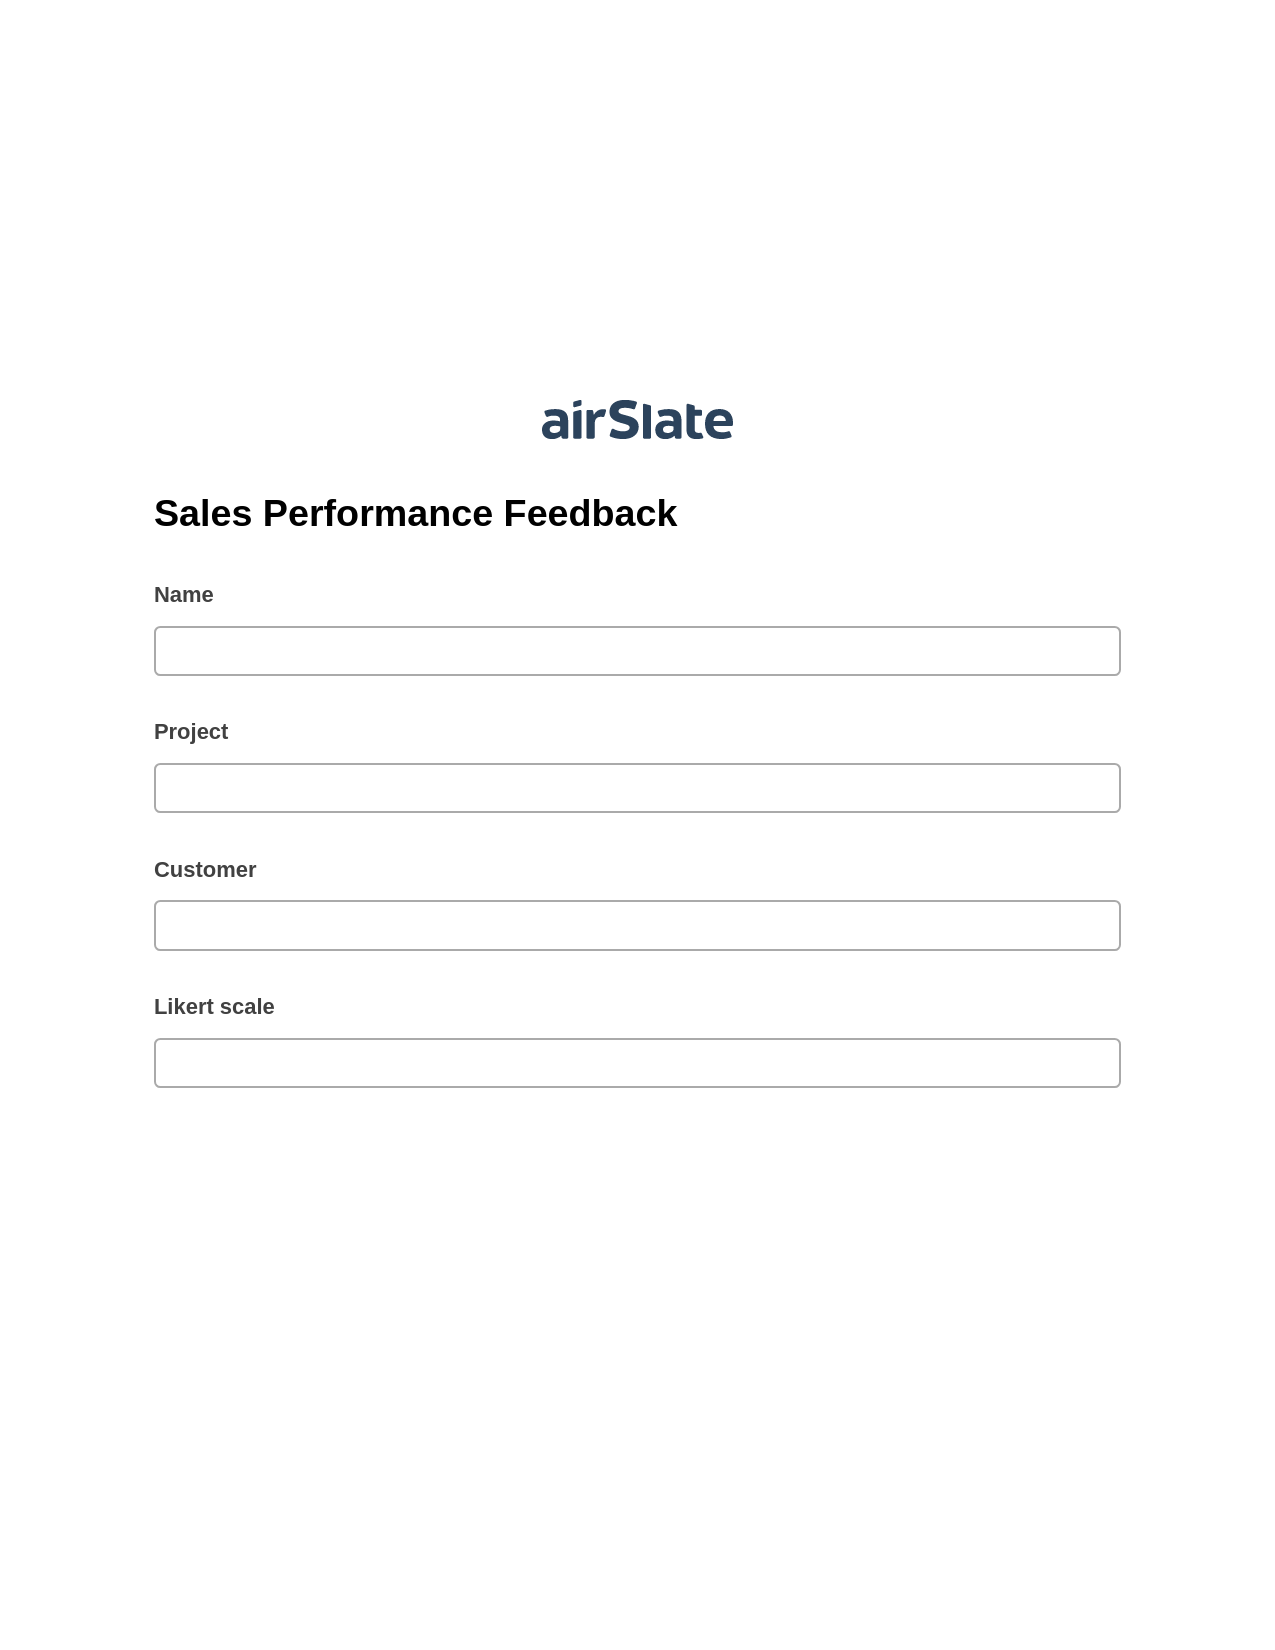 Sales Performance Feedback Pre-fill from Google Sheets Bot, Lock the slate bot, Export to Smartsheet